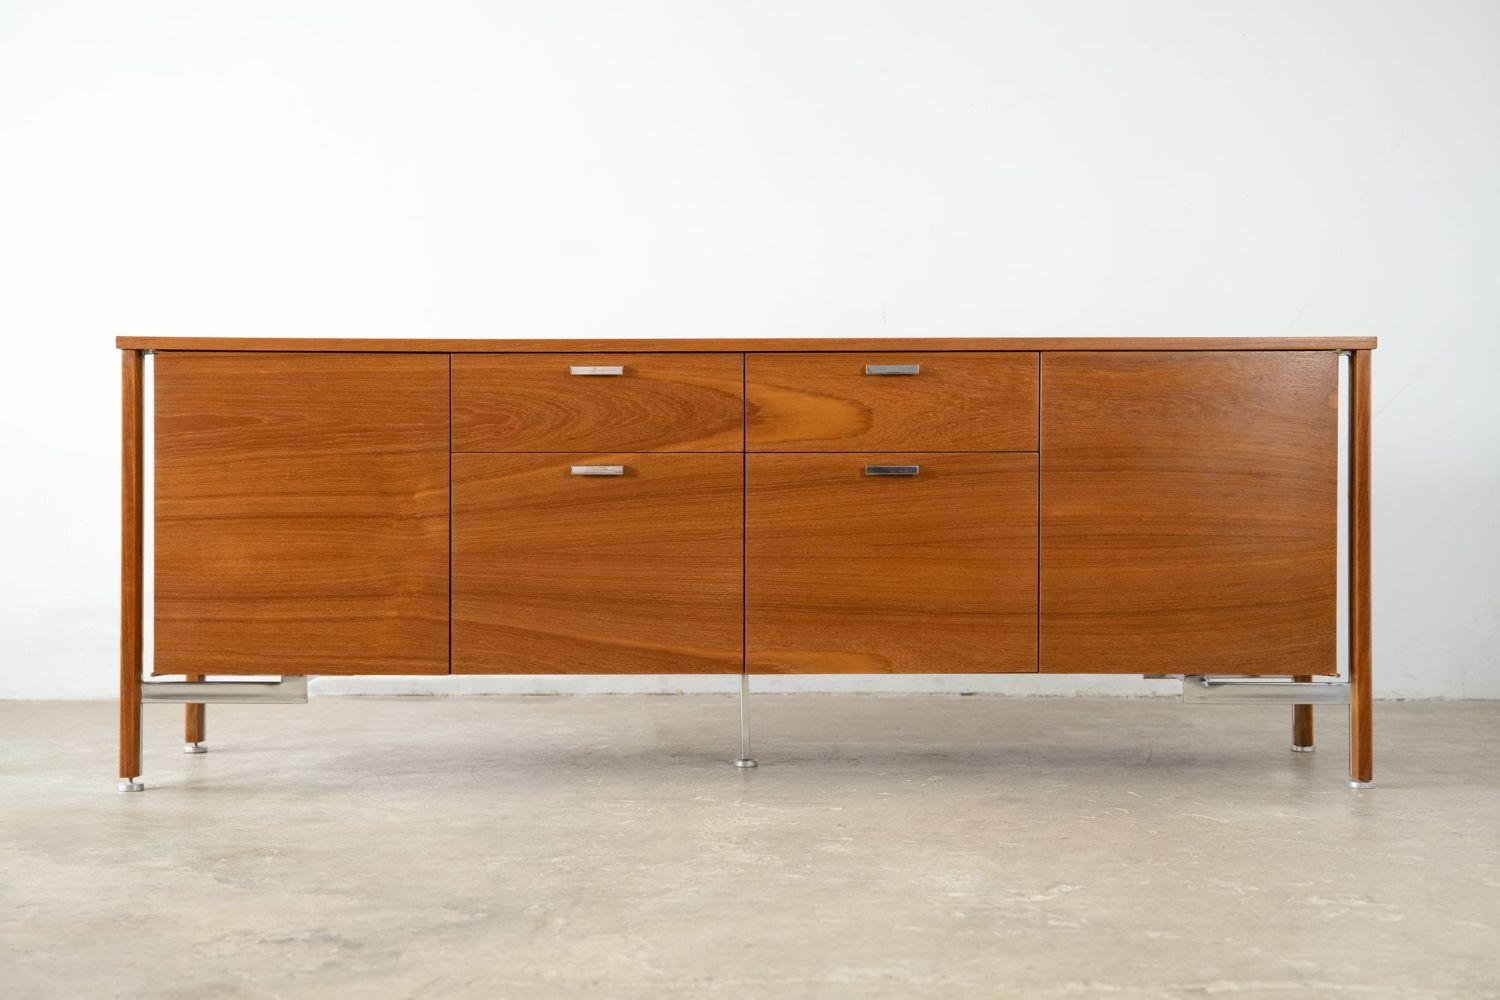 Beautiful free-standing credenza by Robert John, 1960s. The credenza has been professionally restored and is constructed from walnut with oak interior drawers, and sits on a polished stainless base with adjustable glides. The side compartments open